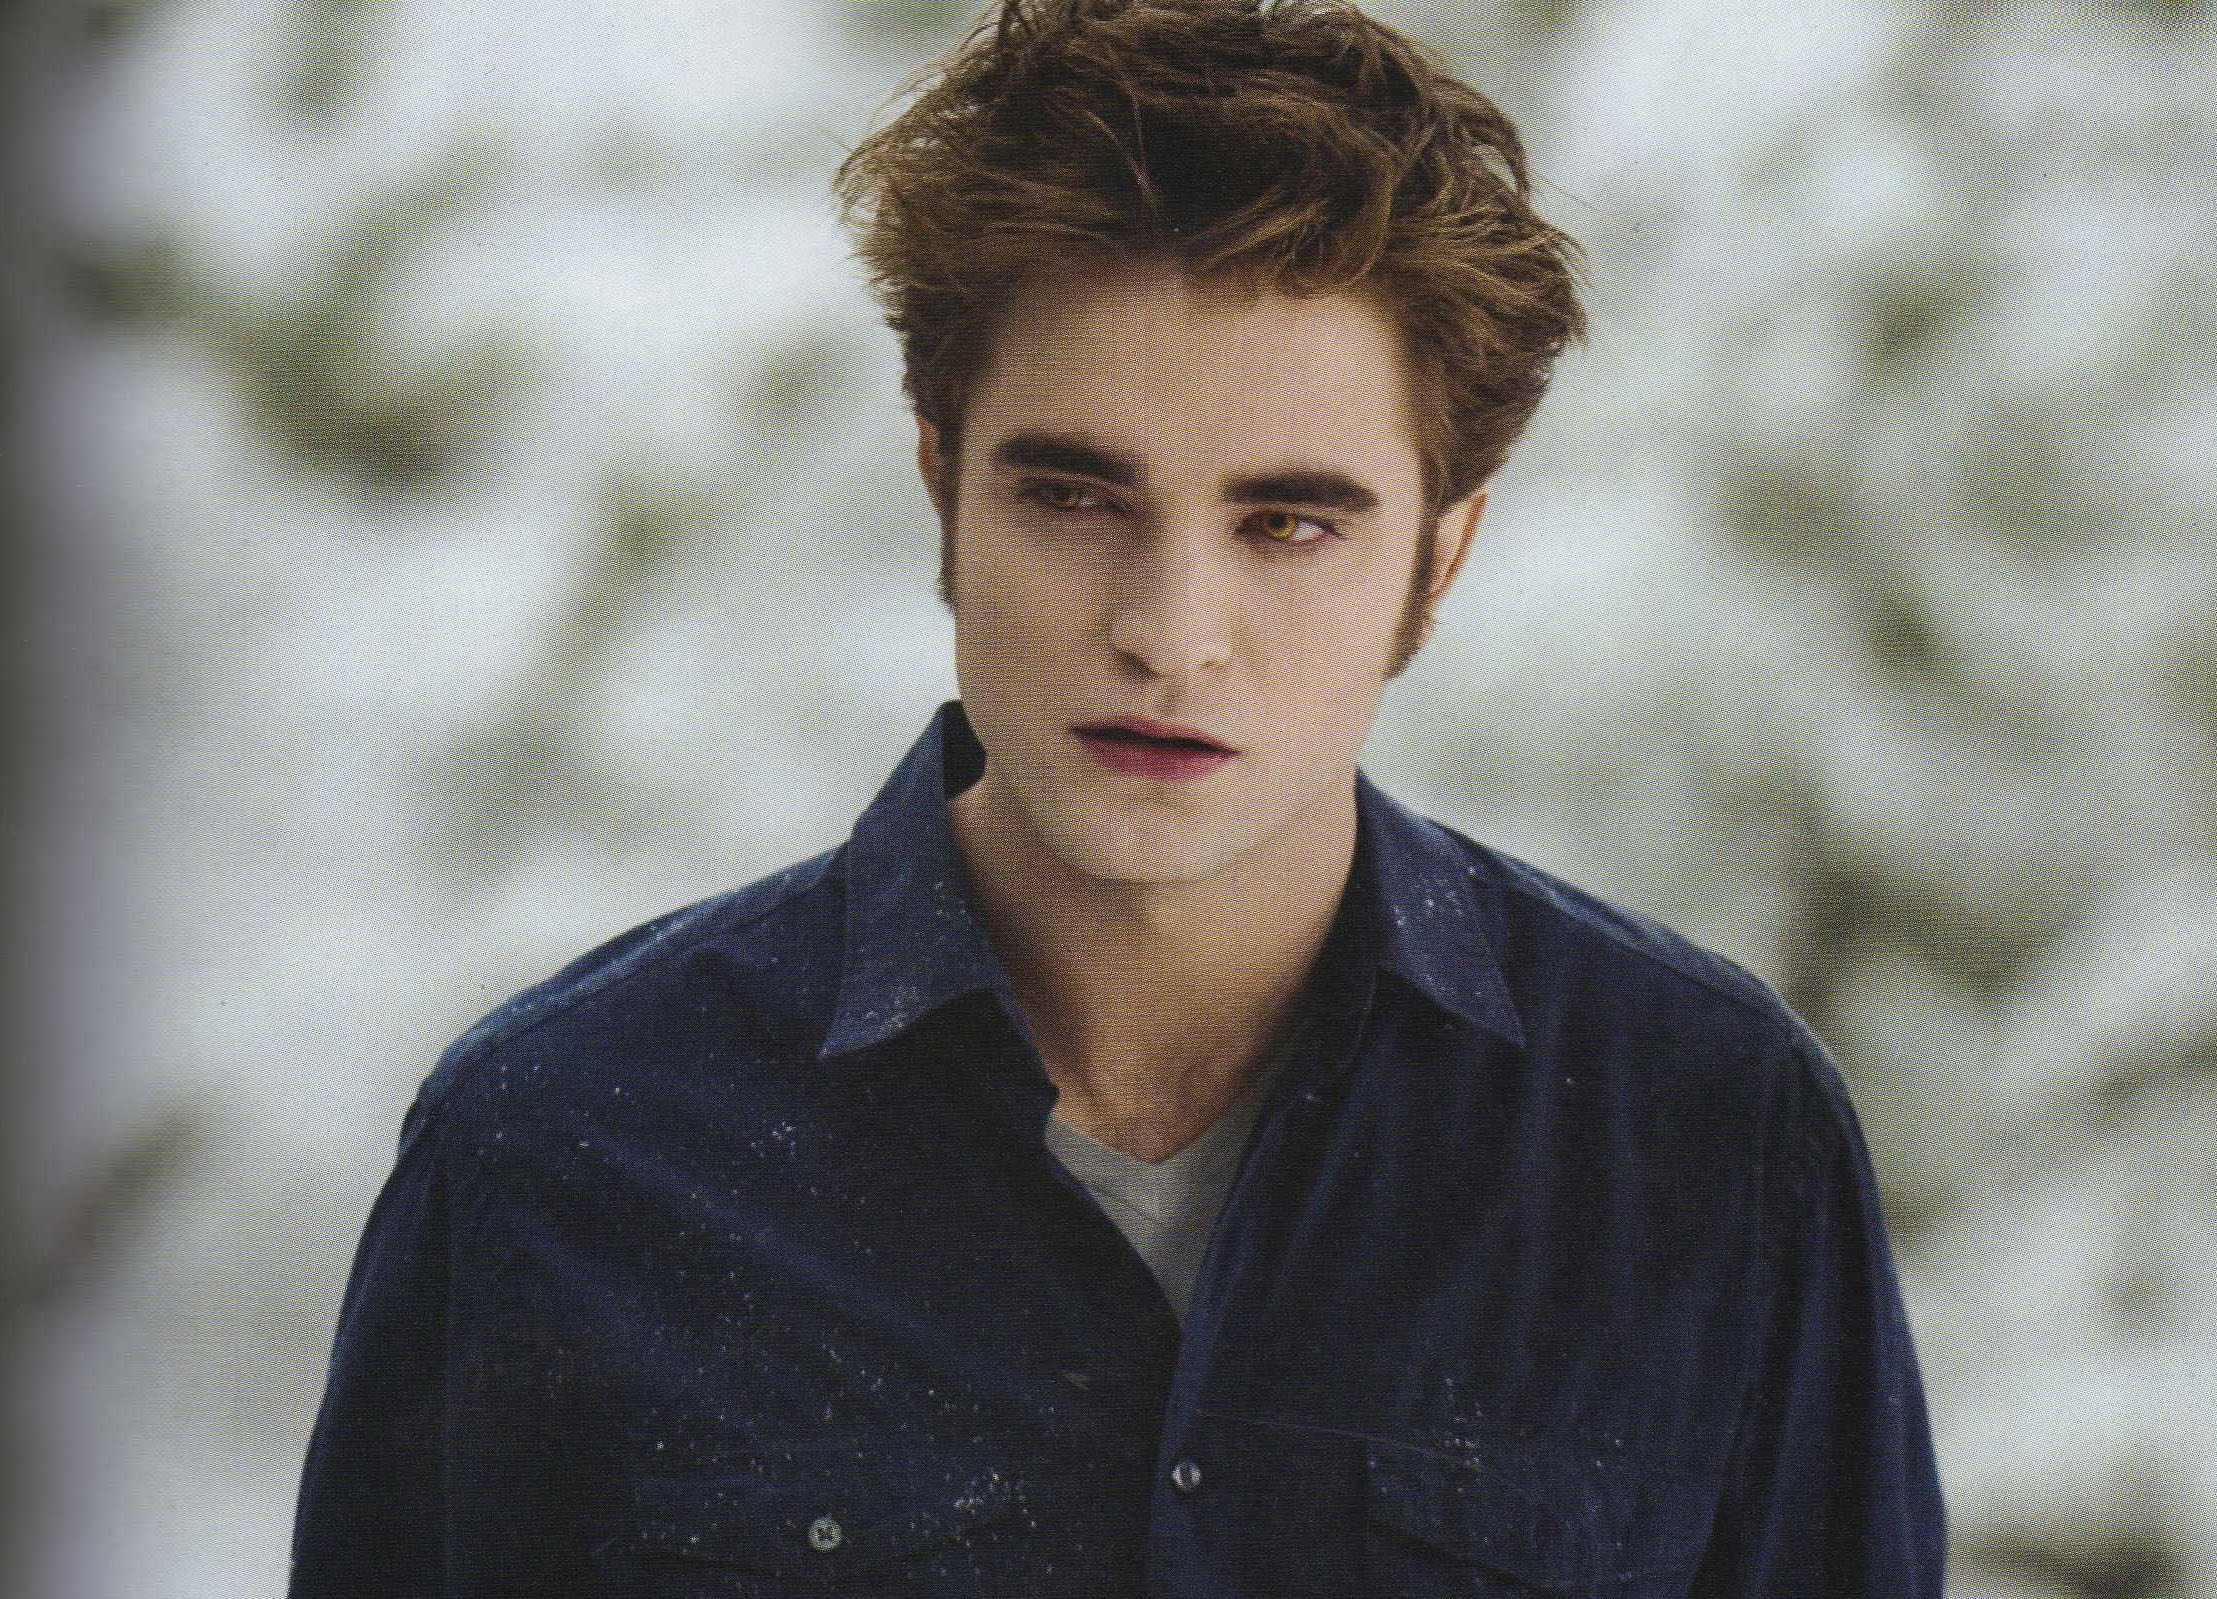 2217x1599 HD Wallpaper and background photos of Edward In Eclipse! for fans of Edward  Cullen images.